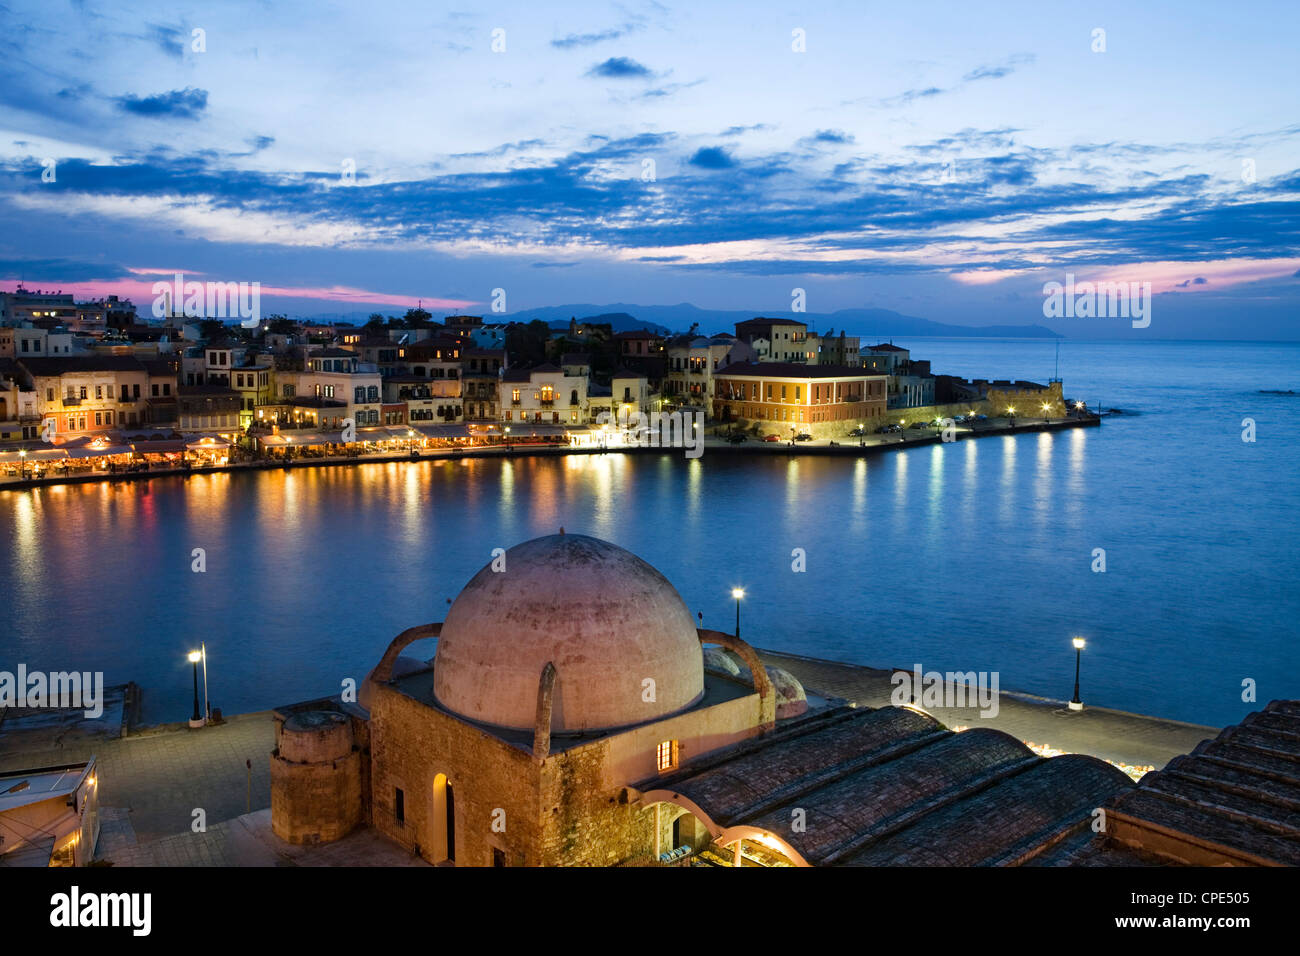 Venetian Harbour and Mosque of the Janissaries at dusk, Chania (Hania), Chania region, Crete, Greek Islands, Greece, Europe Stock Photo